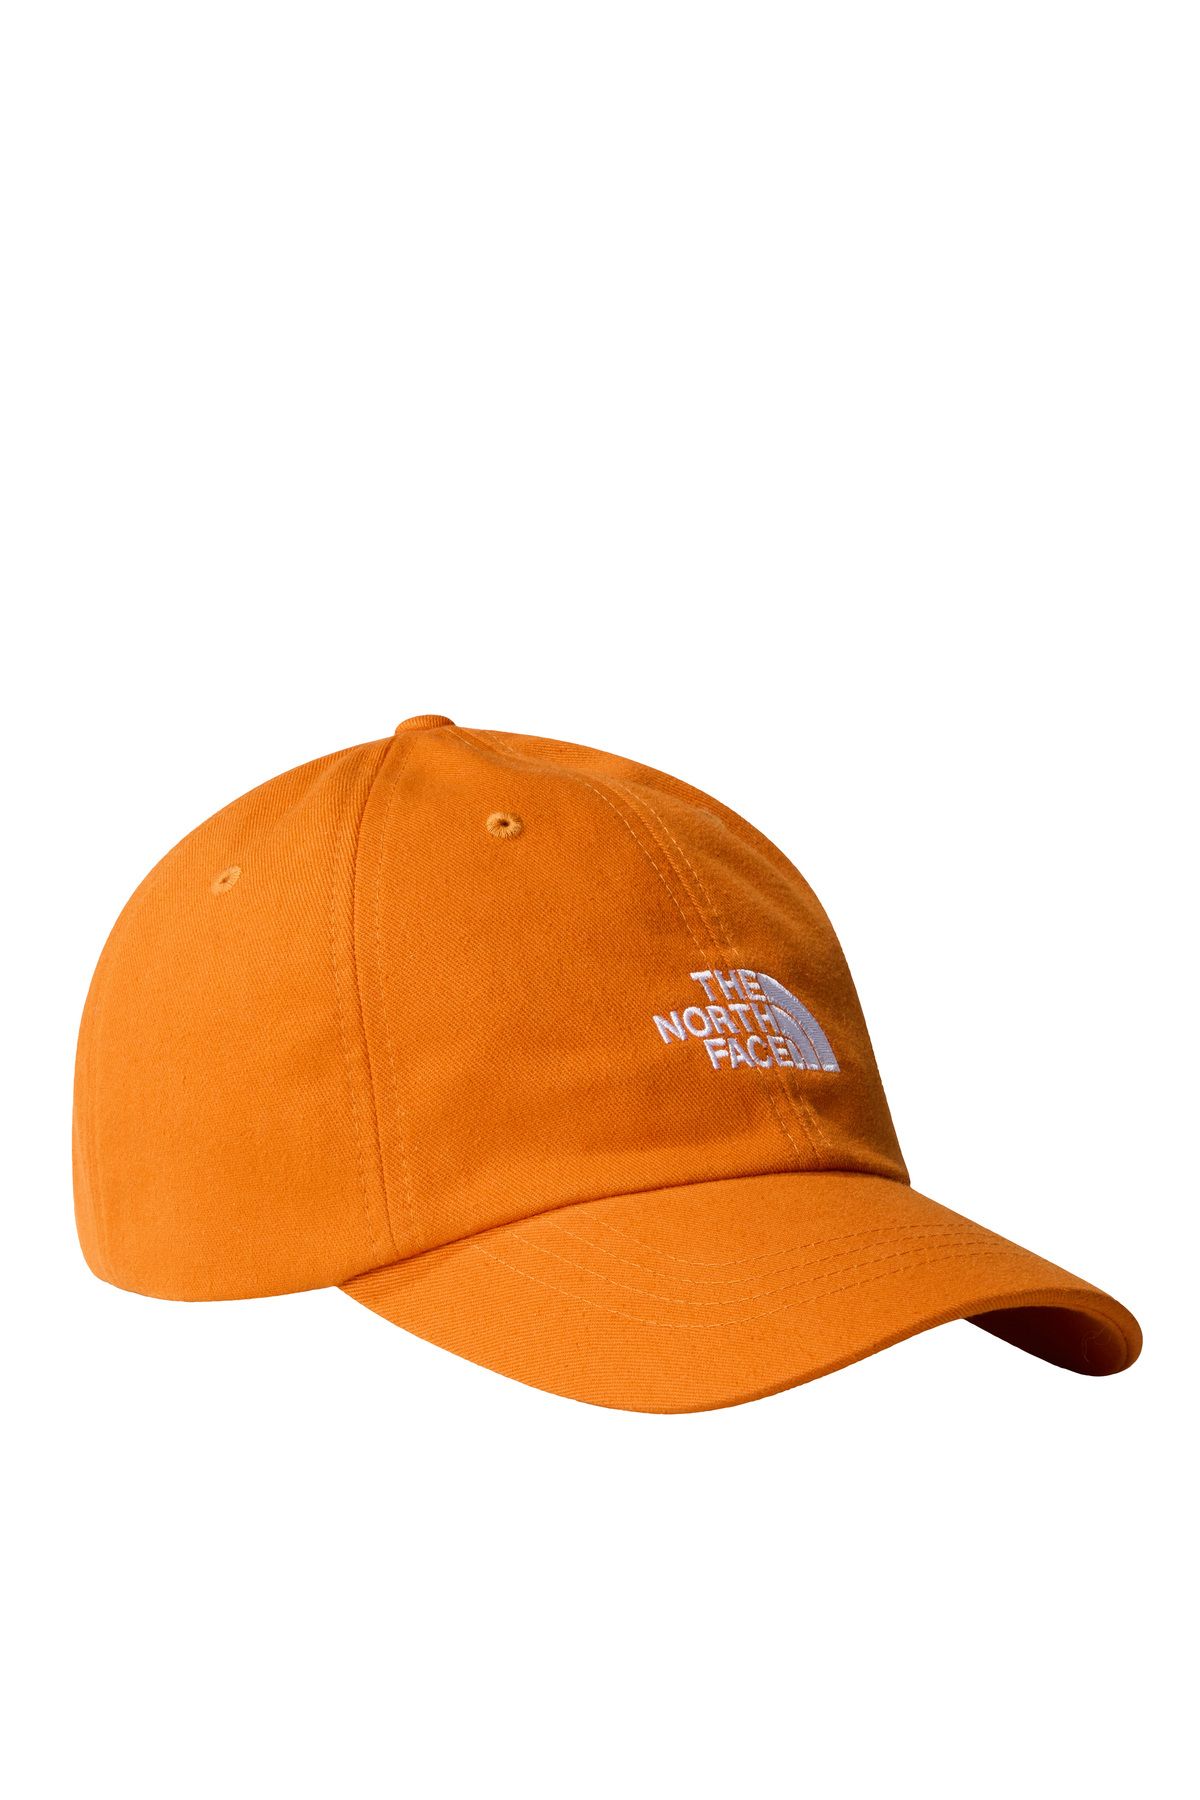 The North Face Norm Hat Unisex Turuncu Şapka Nf0a7whopco1